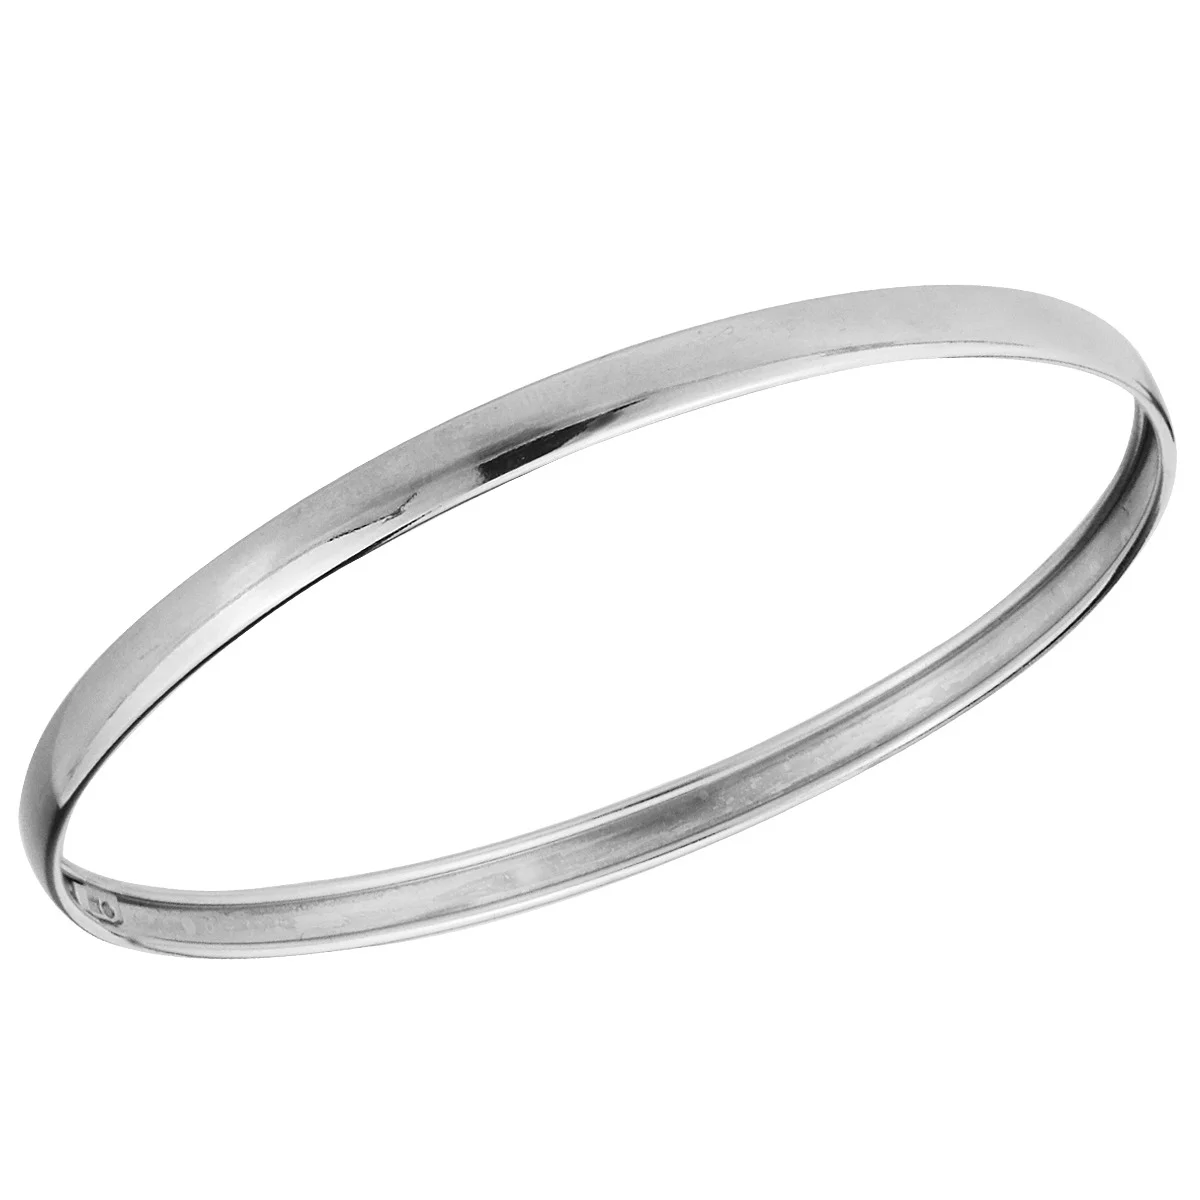 Sterling silver handcuff bracelet 925 platinum plated on a patent surface.